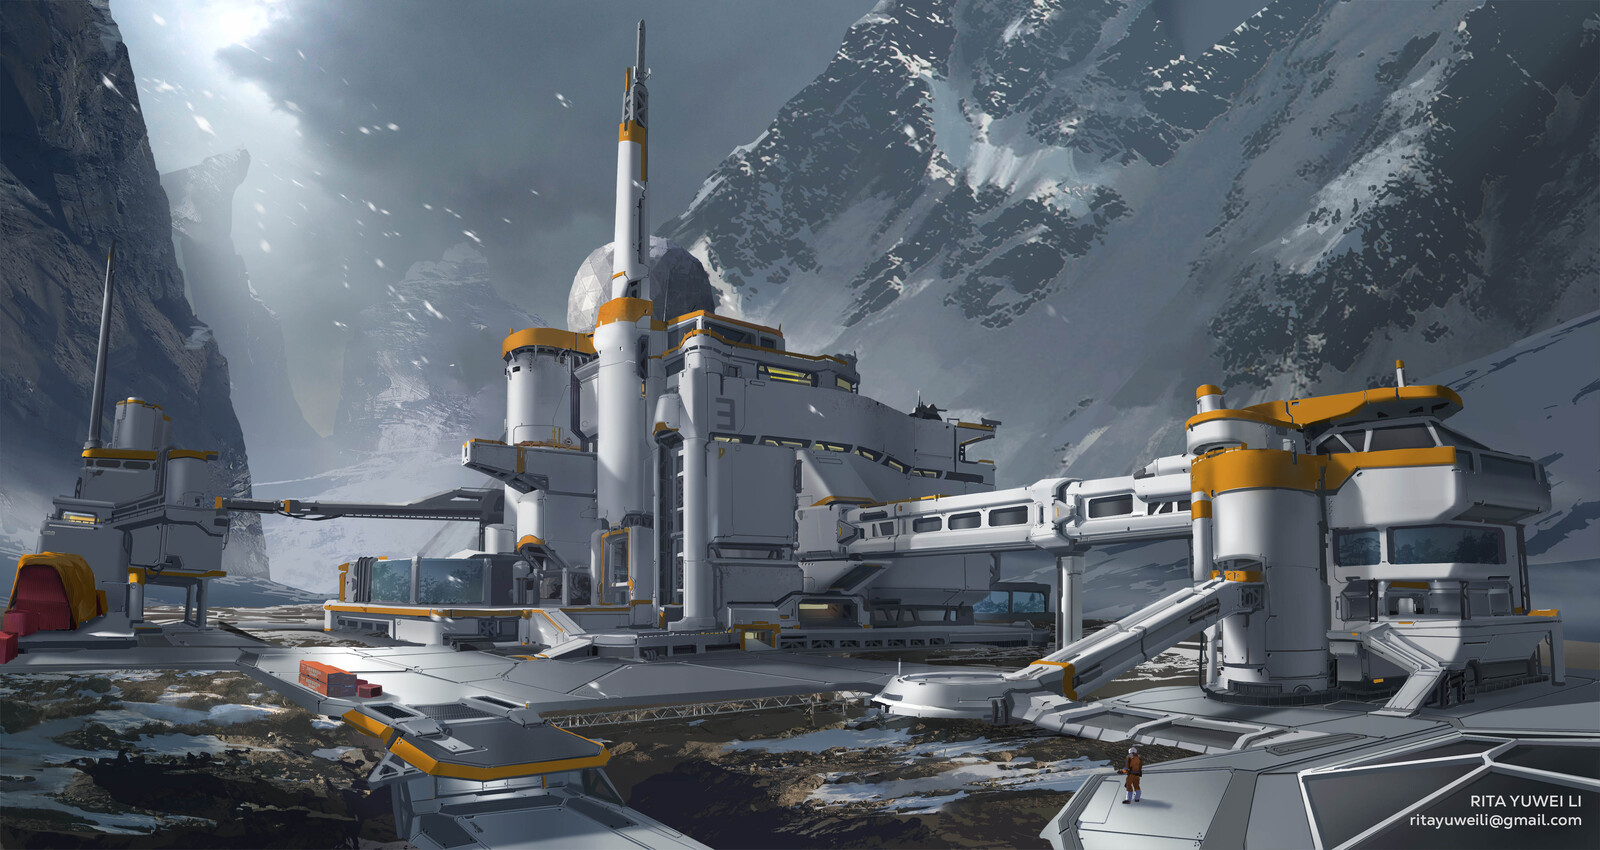 Expedition X: Research Station